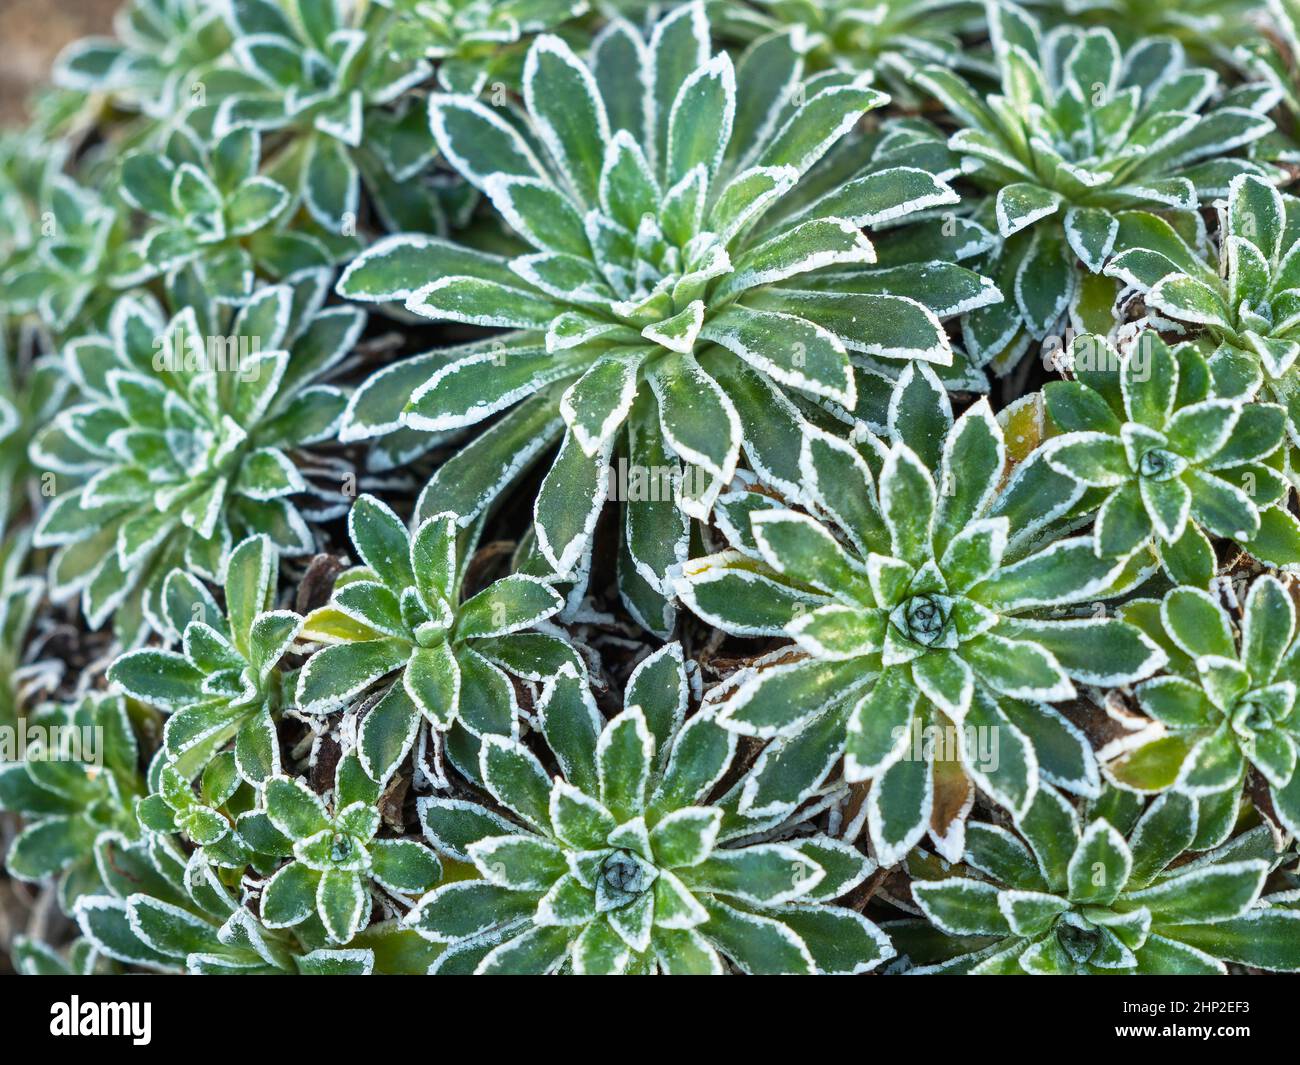 Closeup of radial green and white leaves of the saxifrage plant Saxifraga catalaunica Stock Photo